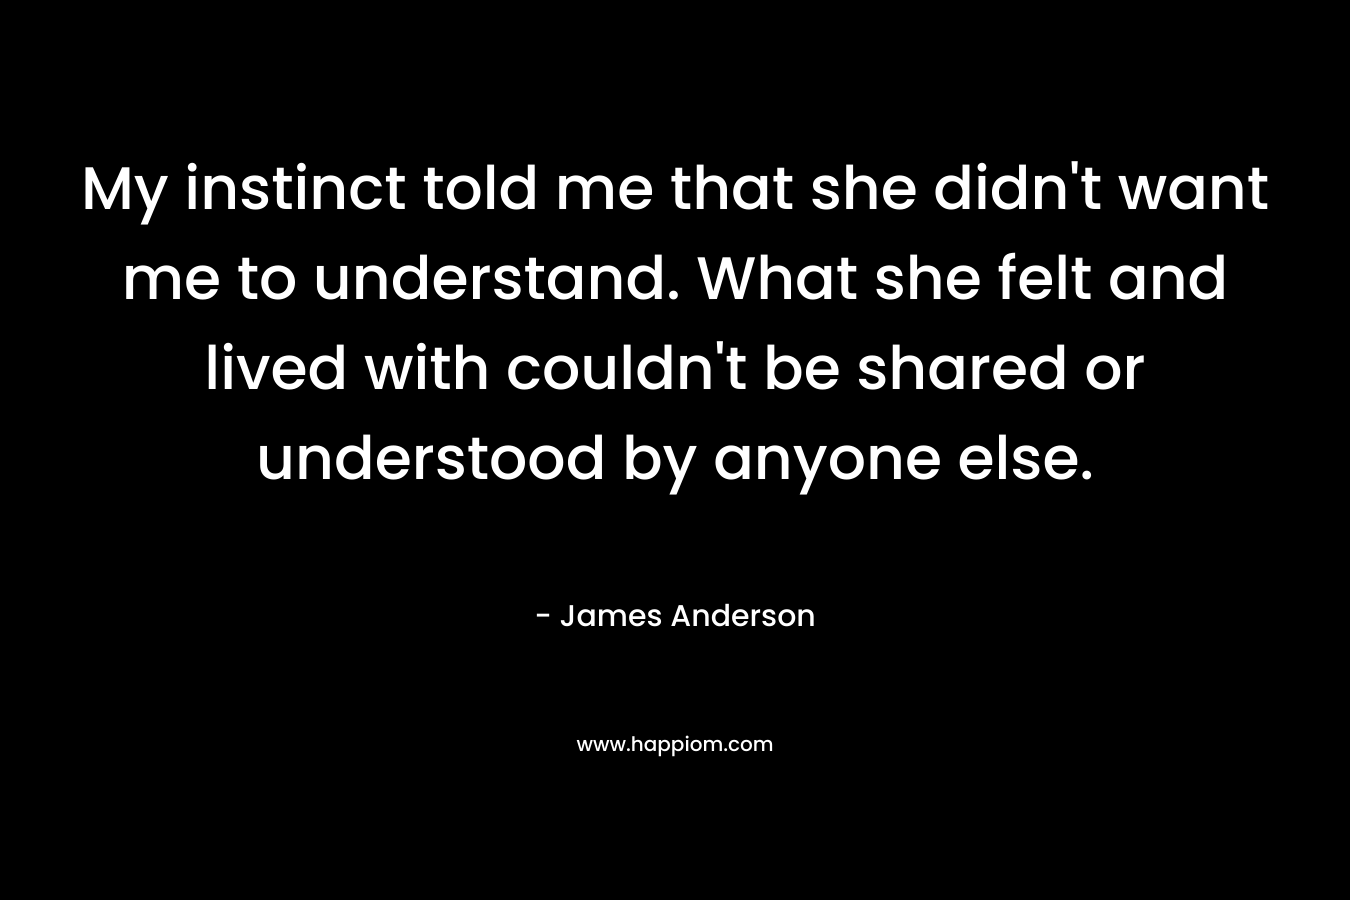 My instinct told me that she didn’t want me to understand. What she felt and lived with couldn’t be shared or understood by anyone else. – James          Anderson